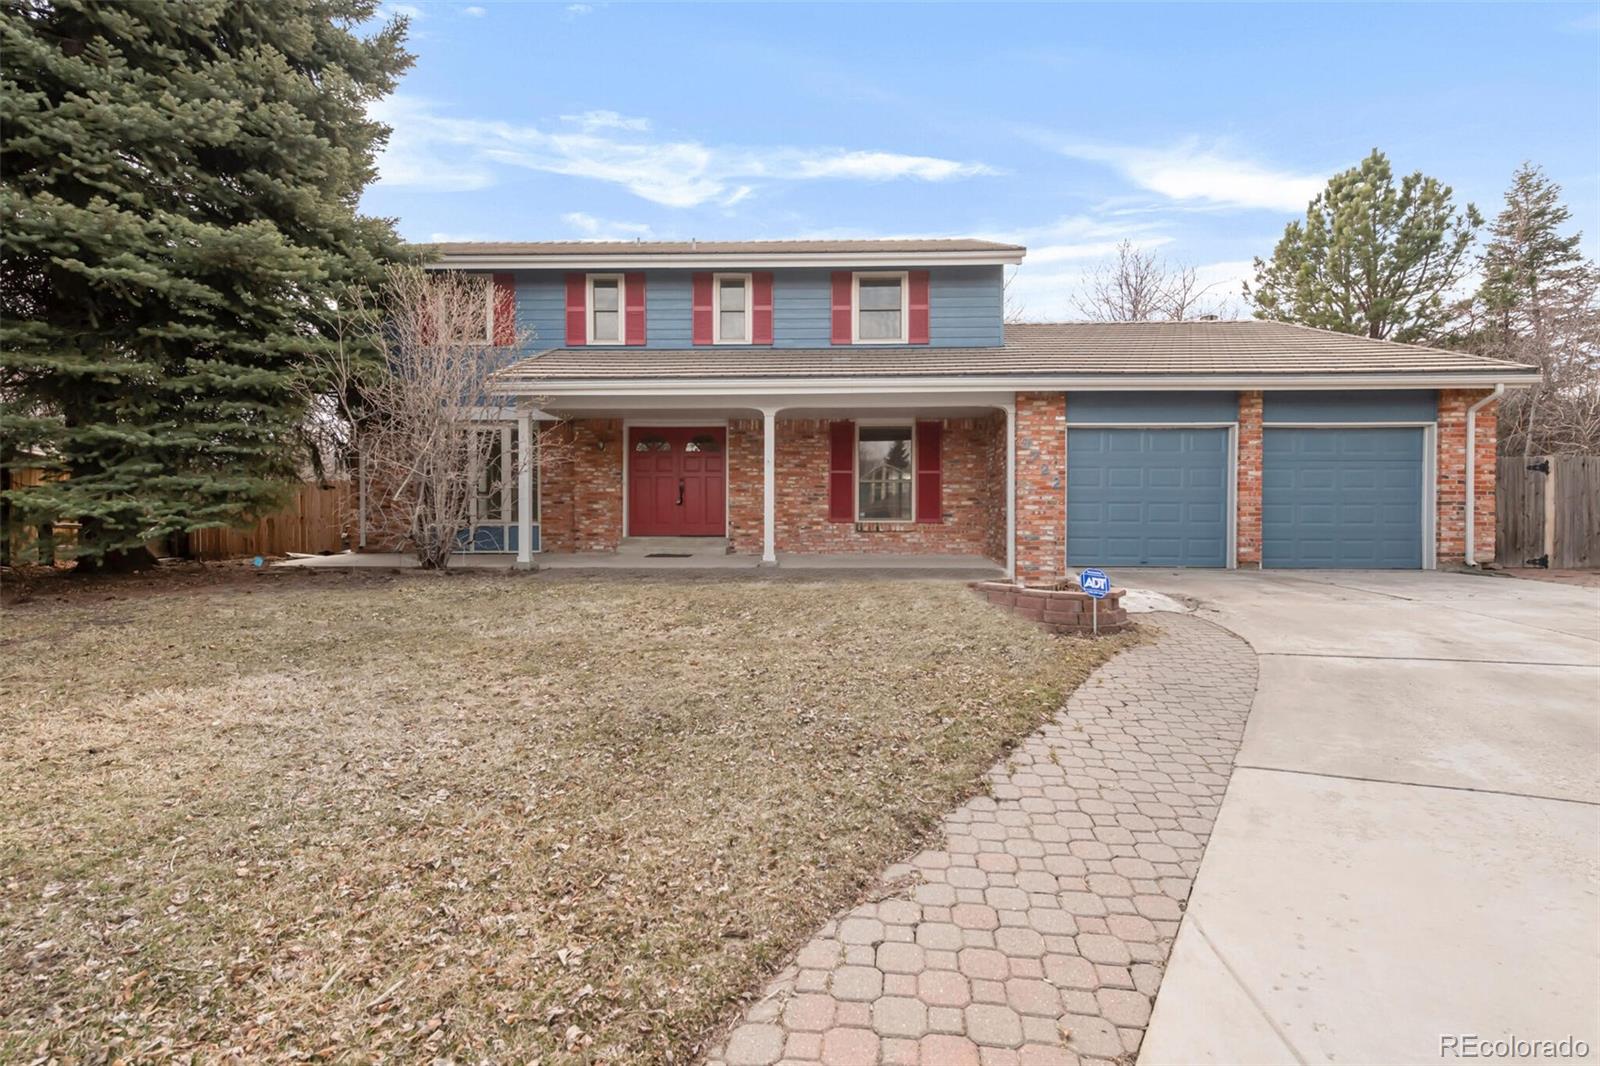 9722 w 87th avenue, Arvada sold home. Closed on 2024-04-19 for $715,000.